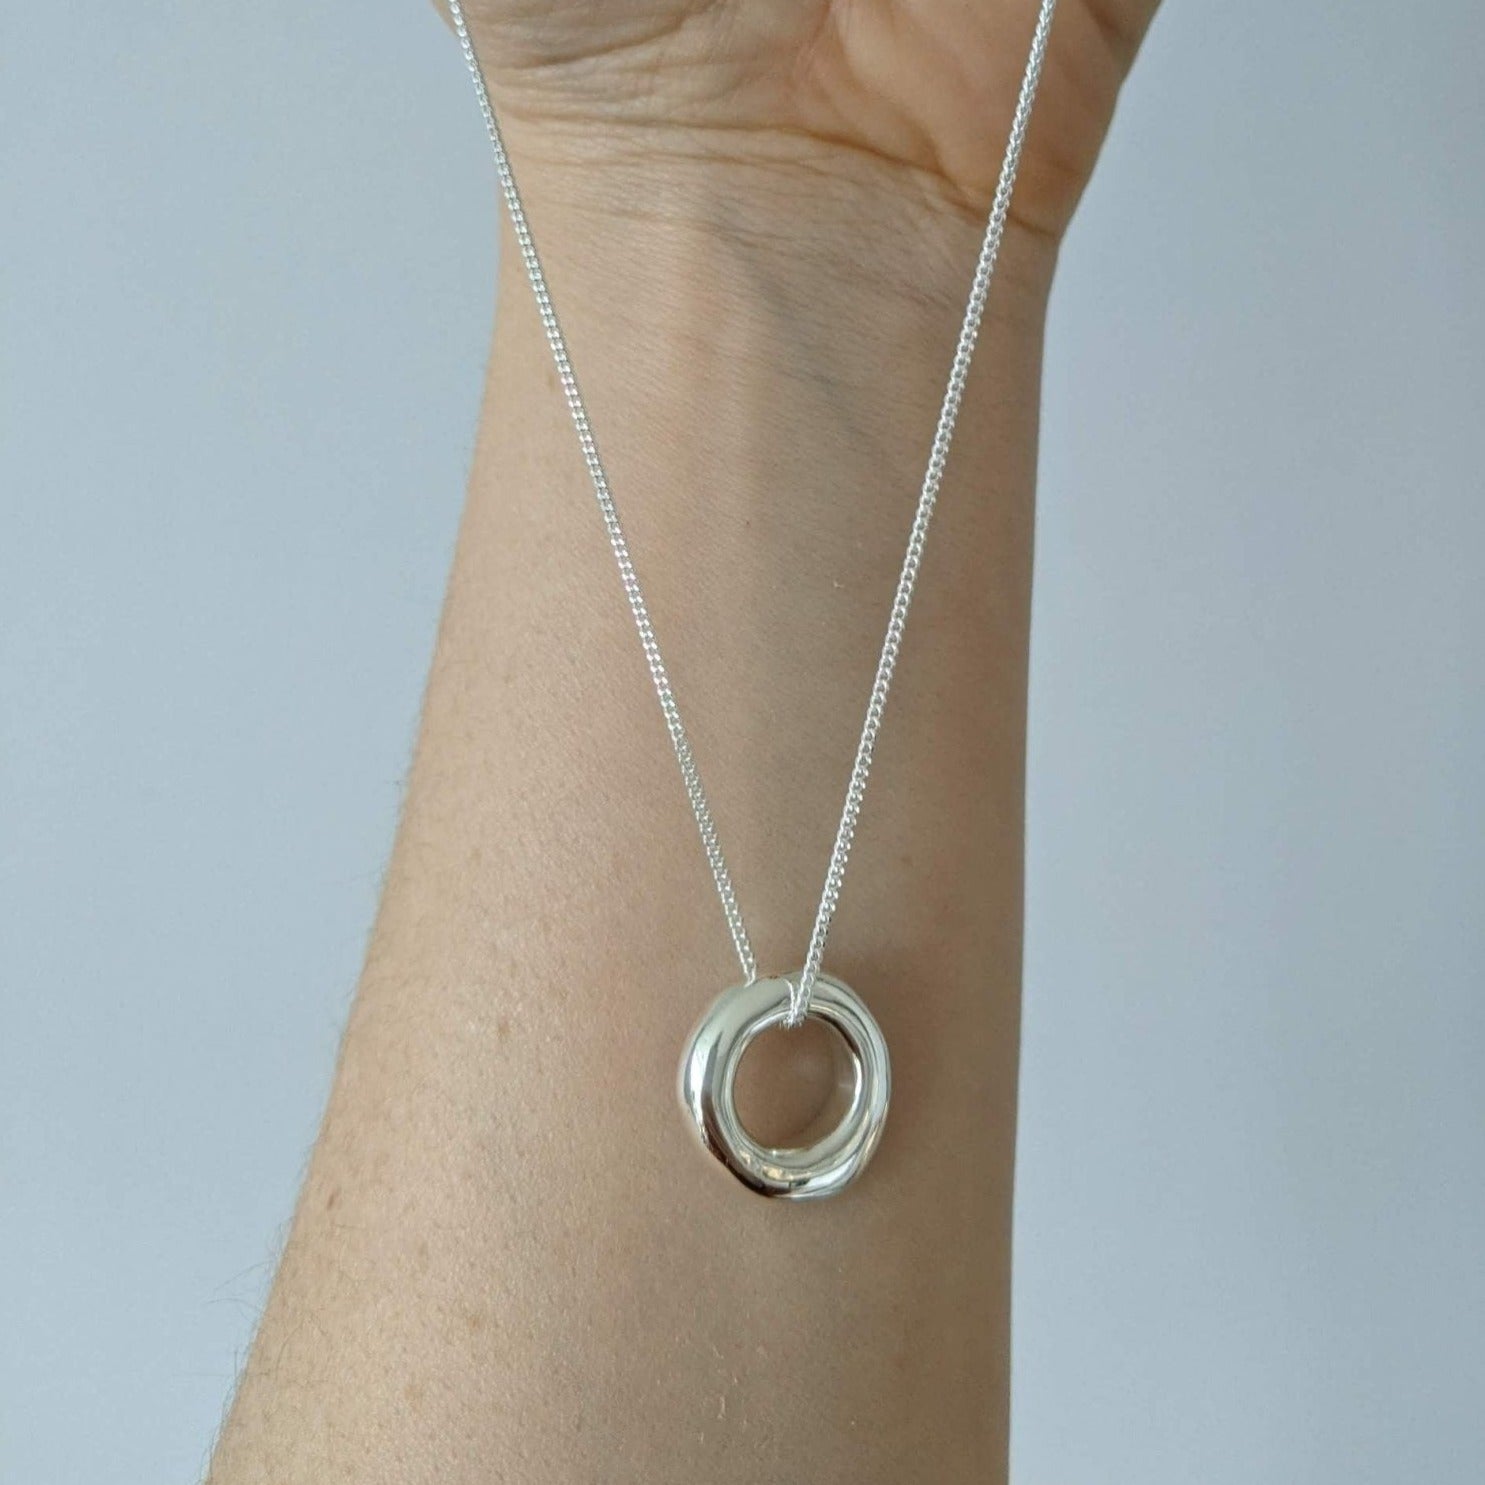 Introducing you to the bestseller, the Eloise necklace designed and created by MeganCollinsJewellery. Subtly combing Scandinavian geometric minimalism with a hint of the organic. 